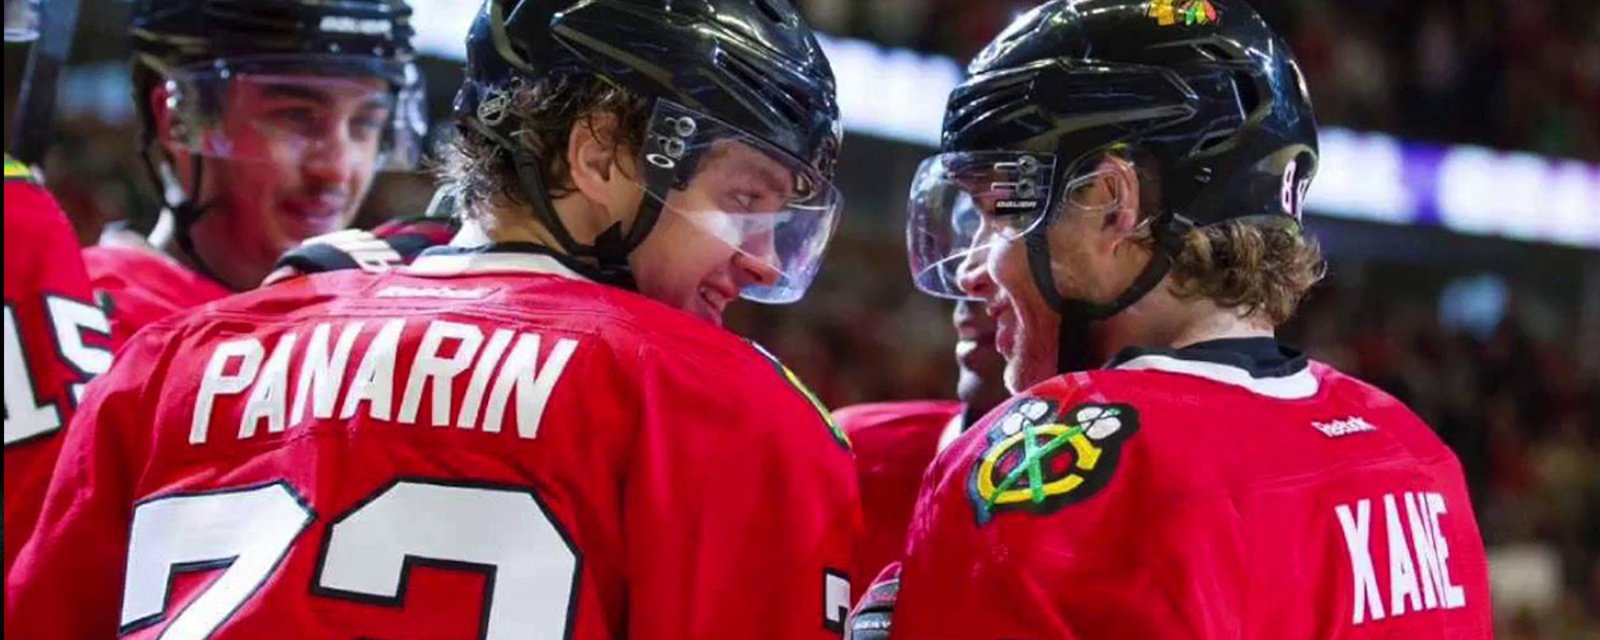 Report: Pending UFA Panarin would “welcome a return” to the Blackhawks via free agency